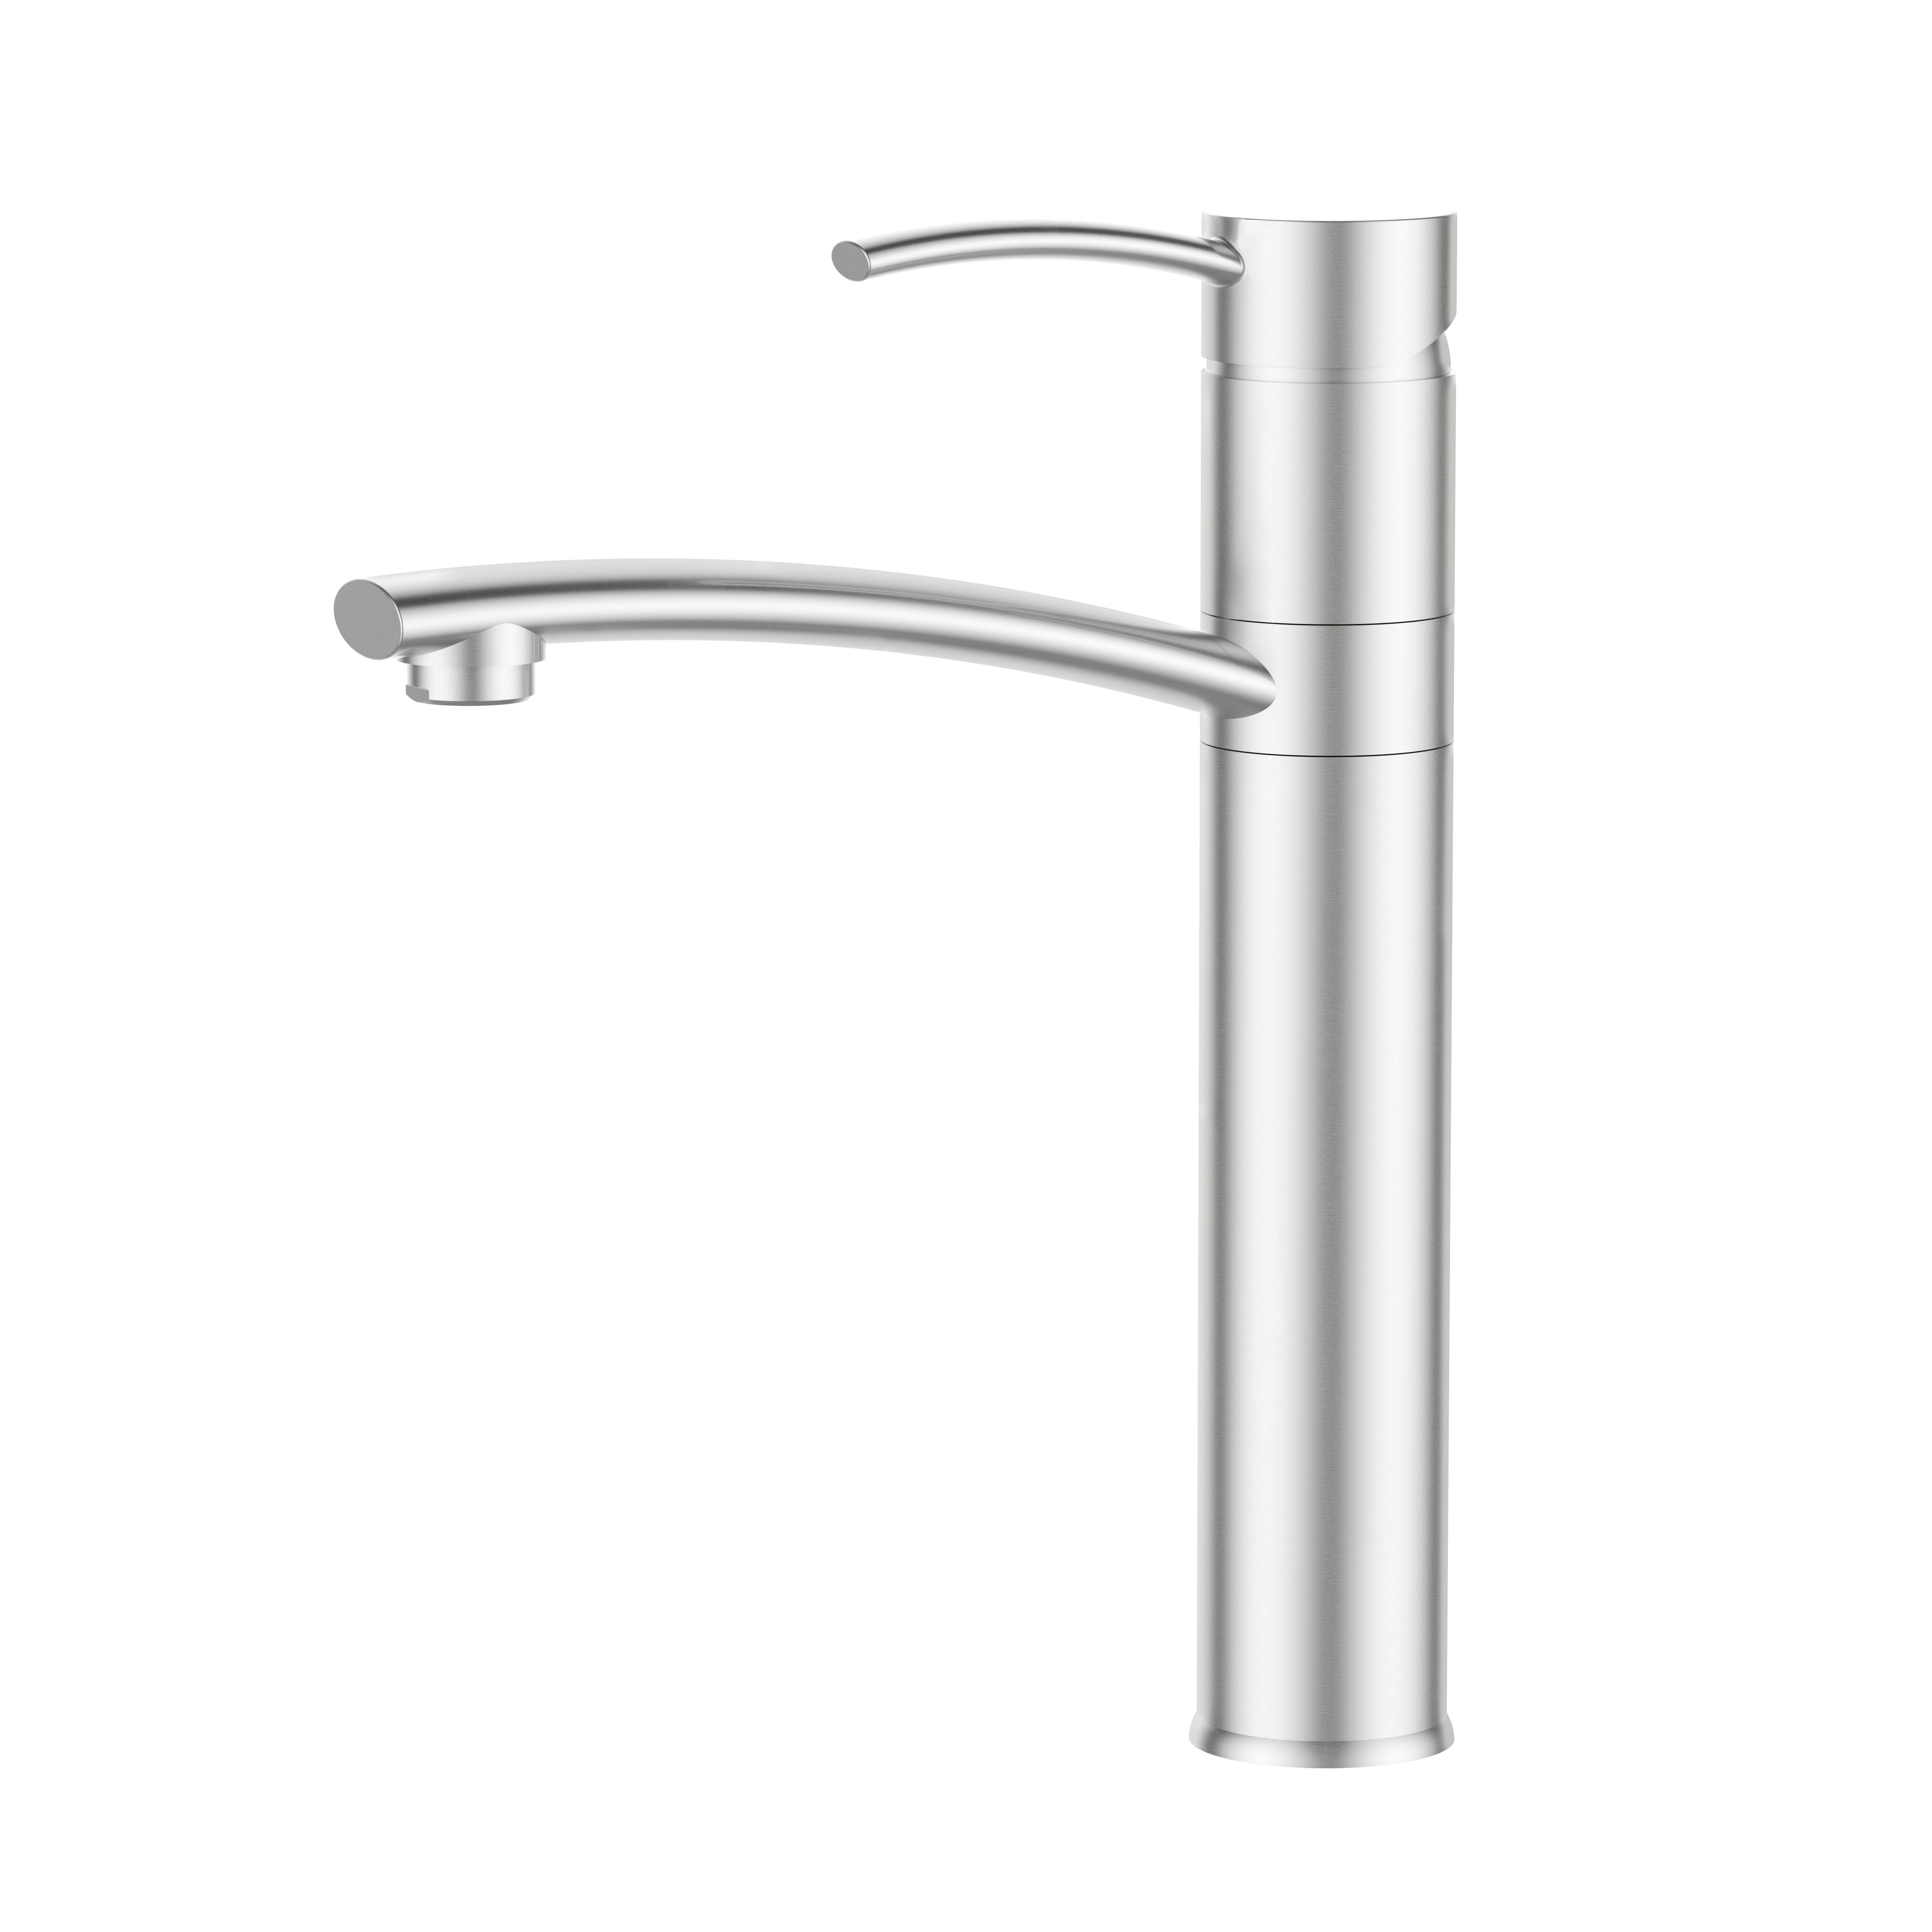 GOWO Contemporary Brushed Nickel Bathroom Bowl Sink Faucets